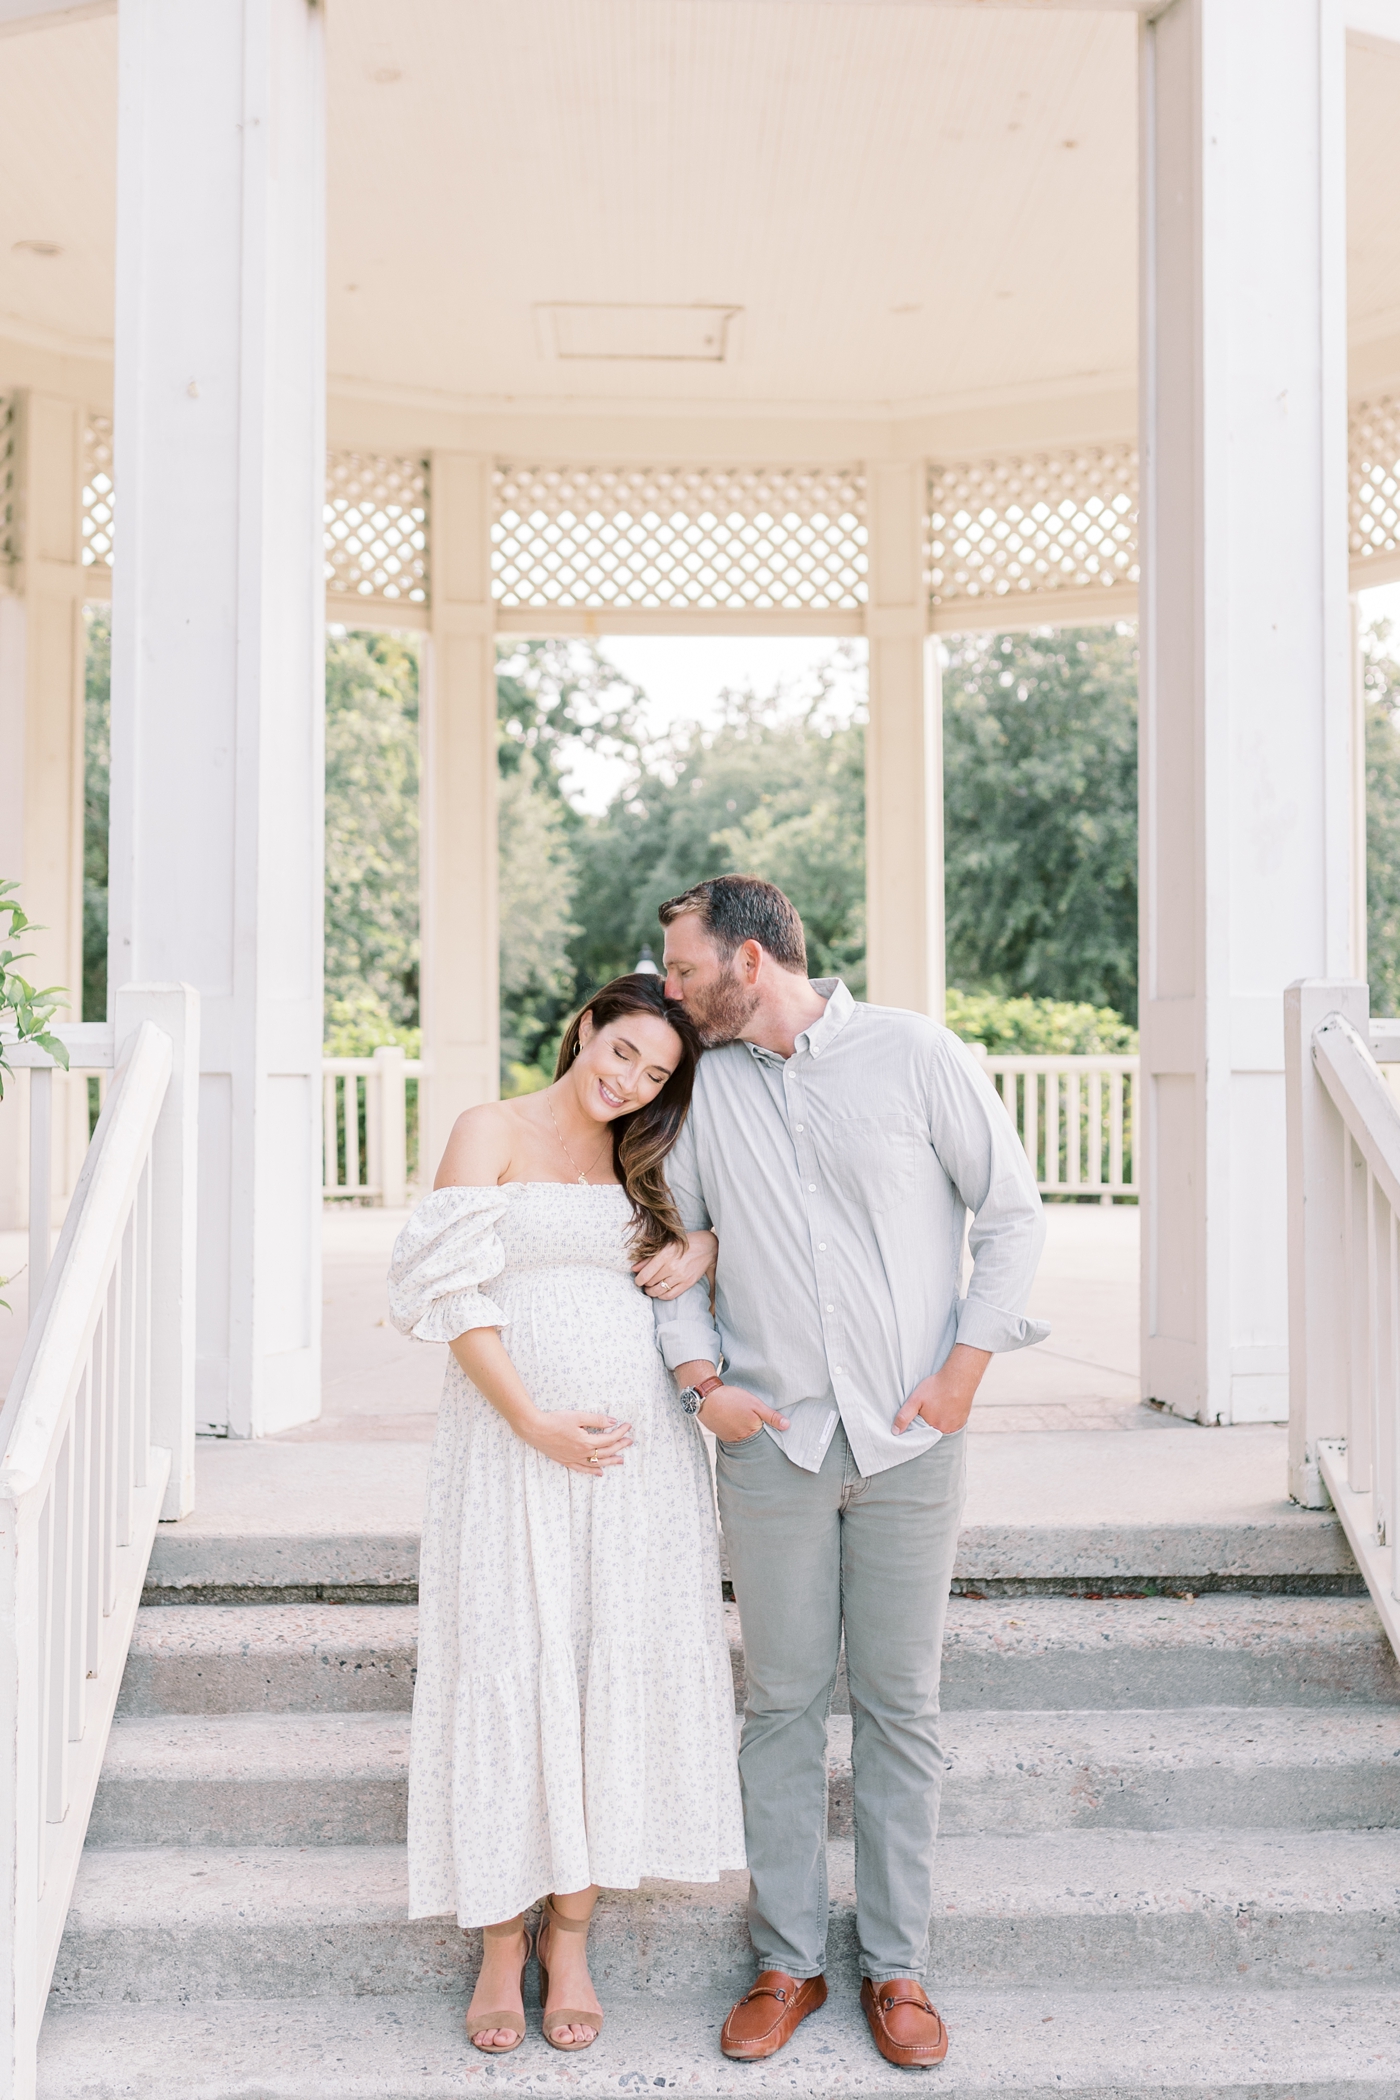 Mom and dad snuggling in a gazebo in Hampton Park | Photo by Caitlyn Motycka Photography.